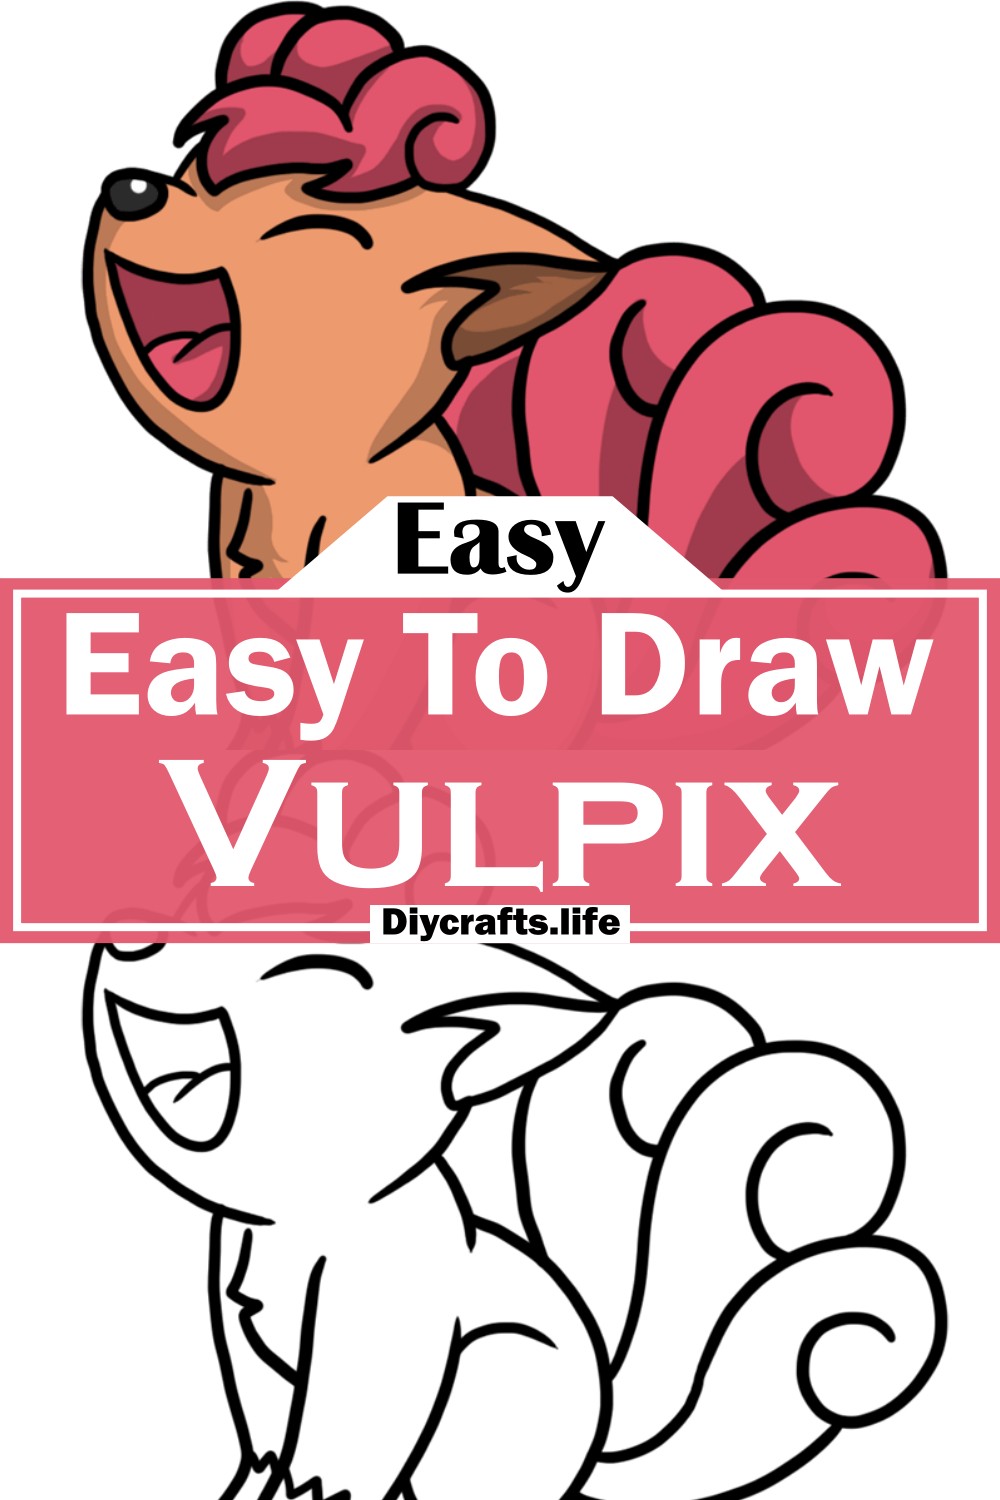 Easy To Draw Vulpix